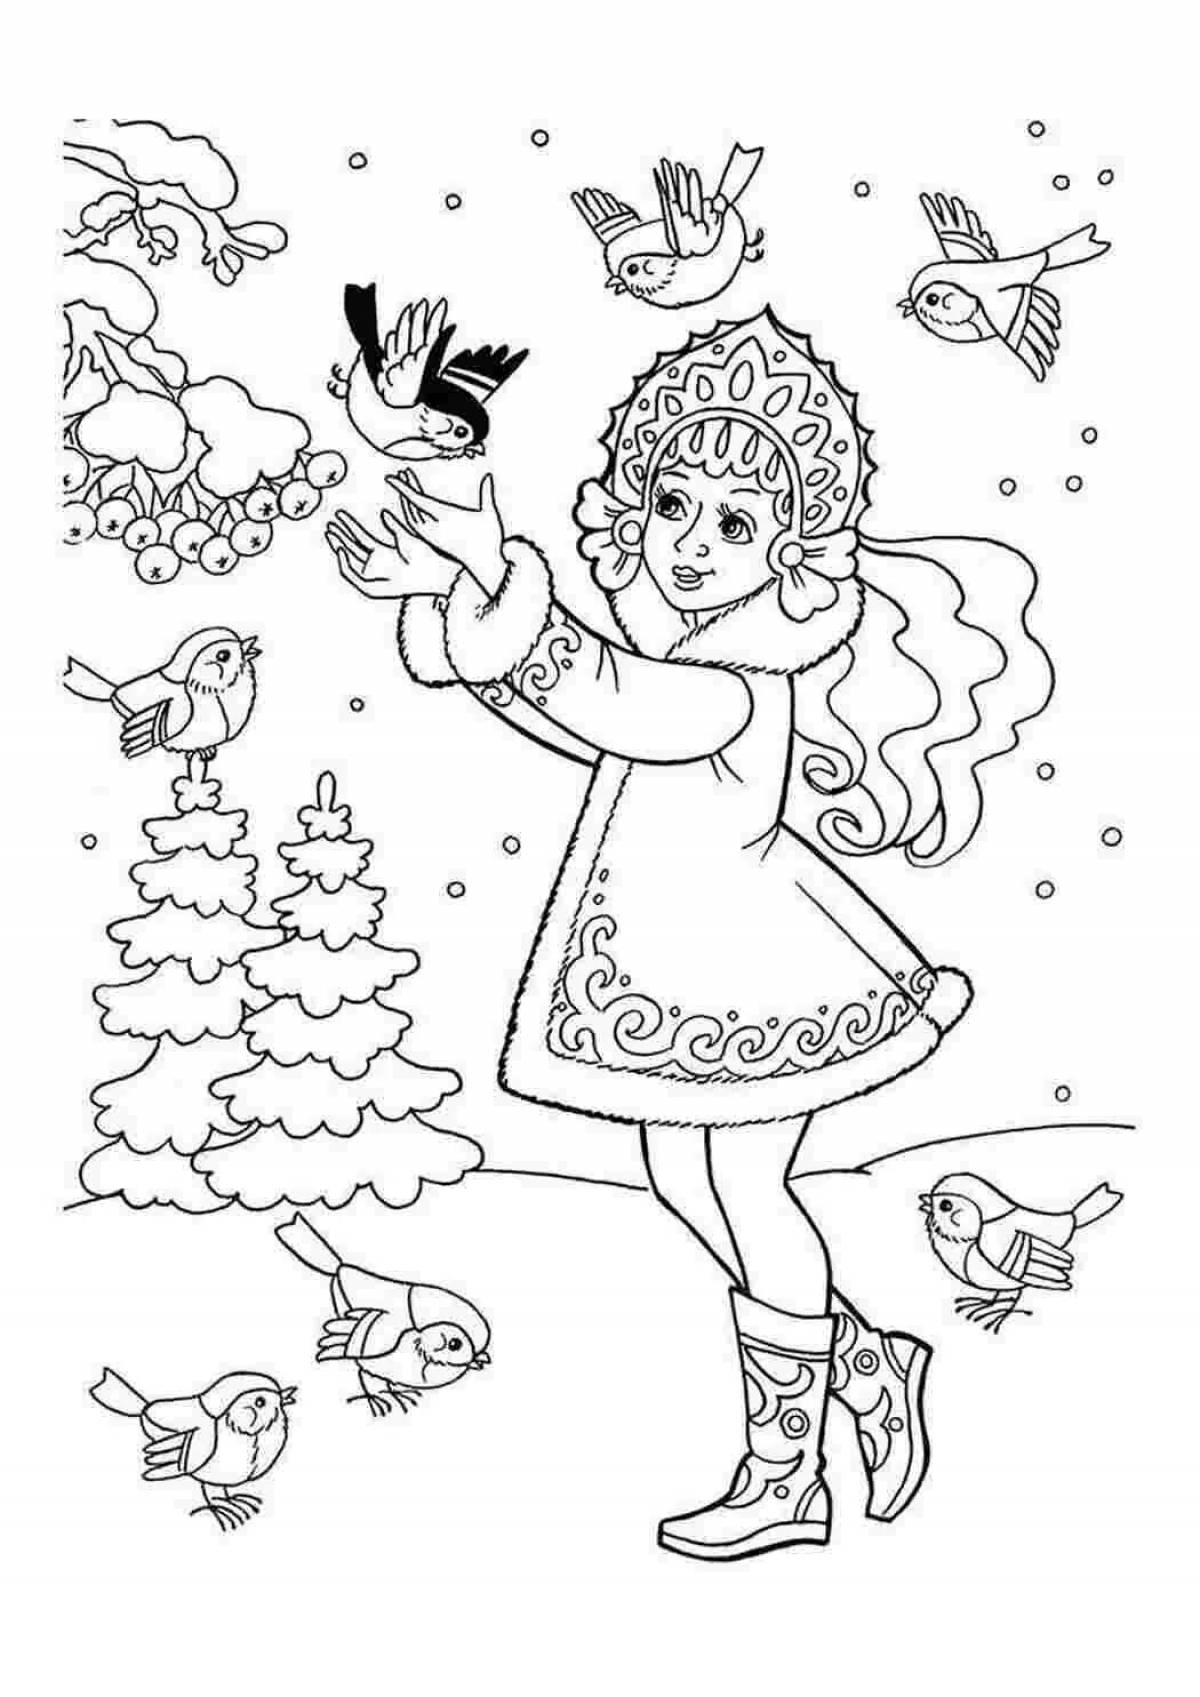 Christmas fairy tale coloring book